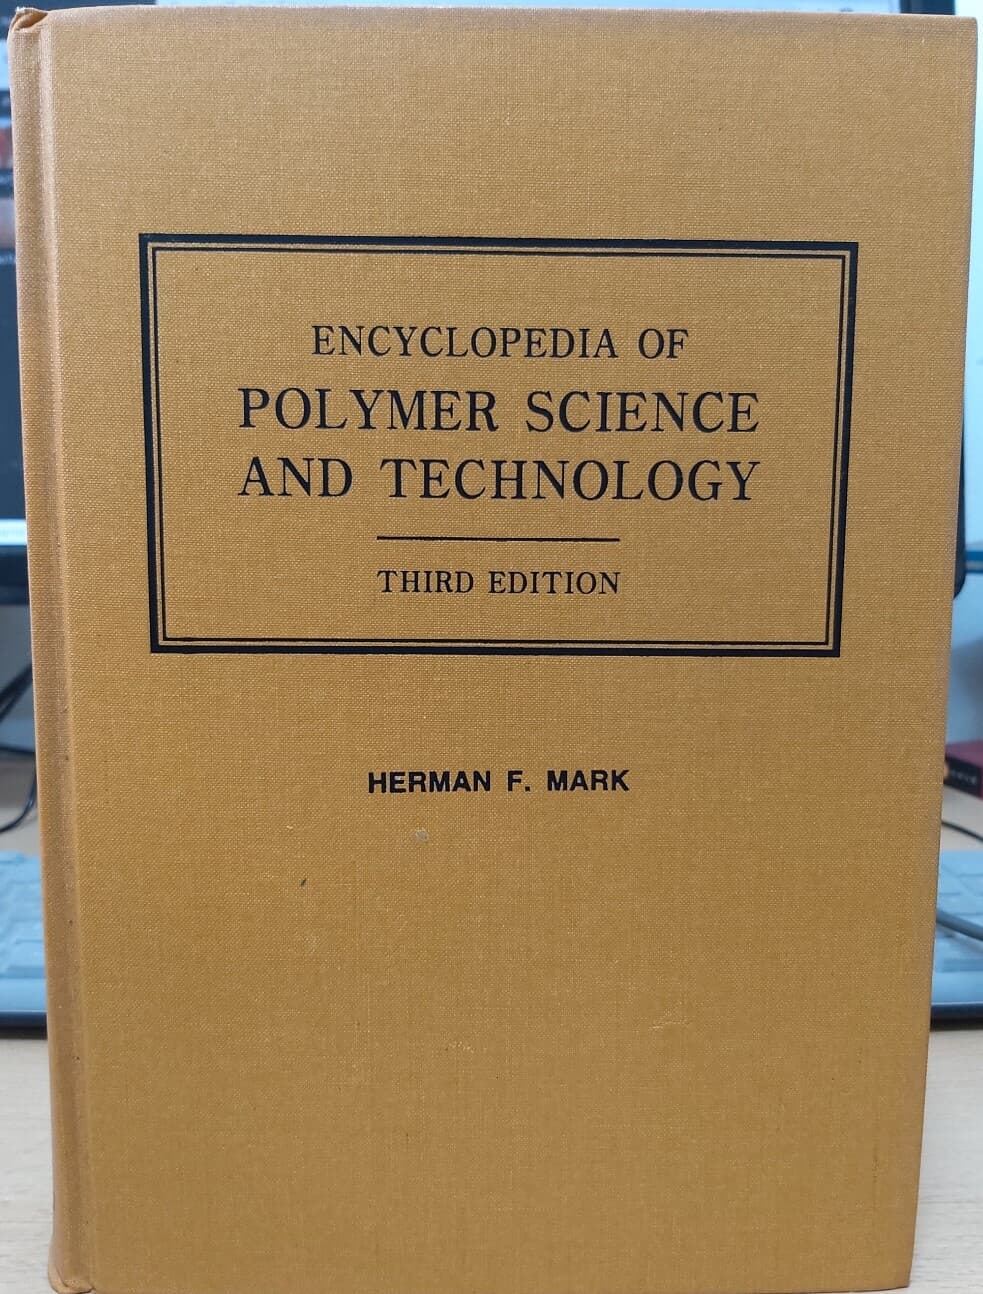 Encyclopedia of Polymer Science and Technology - Vol.2 (Hardcover) (third edition)